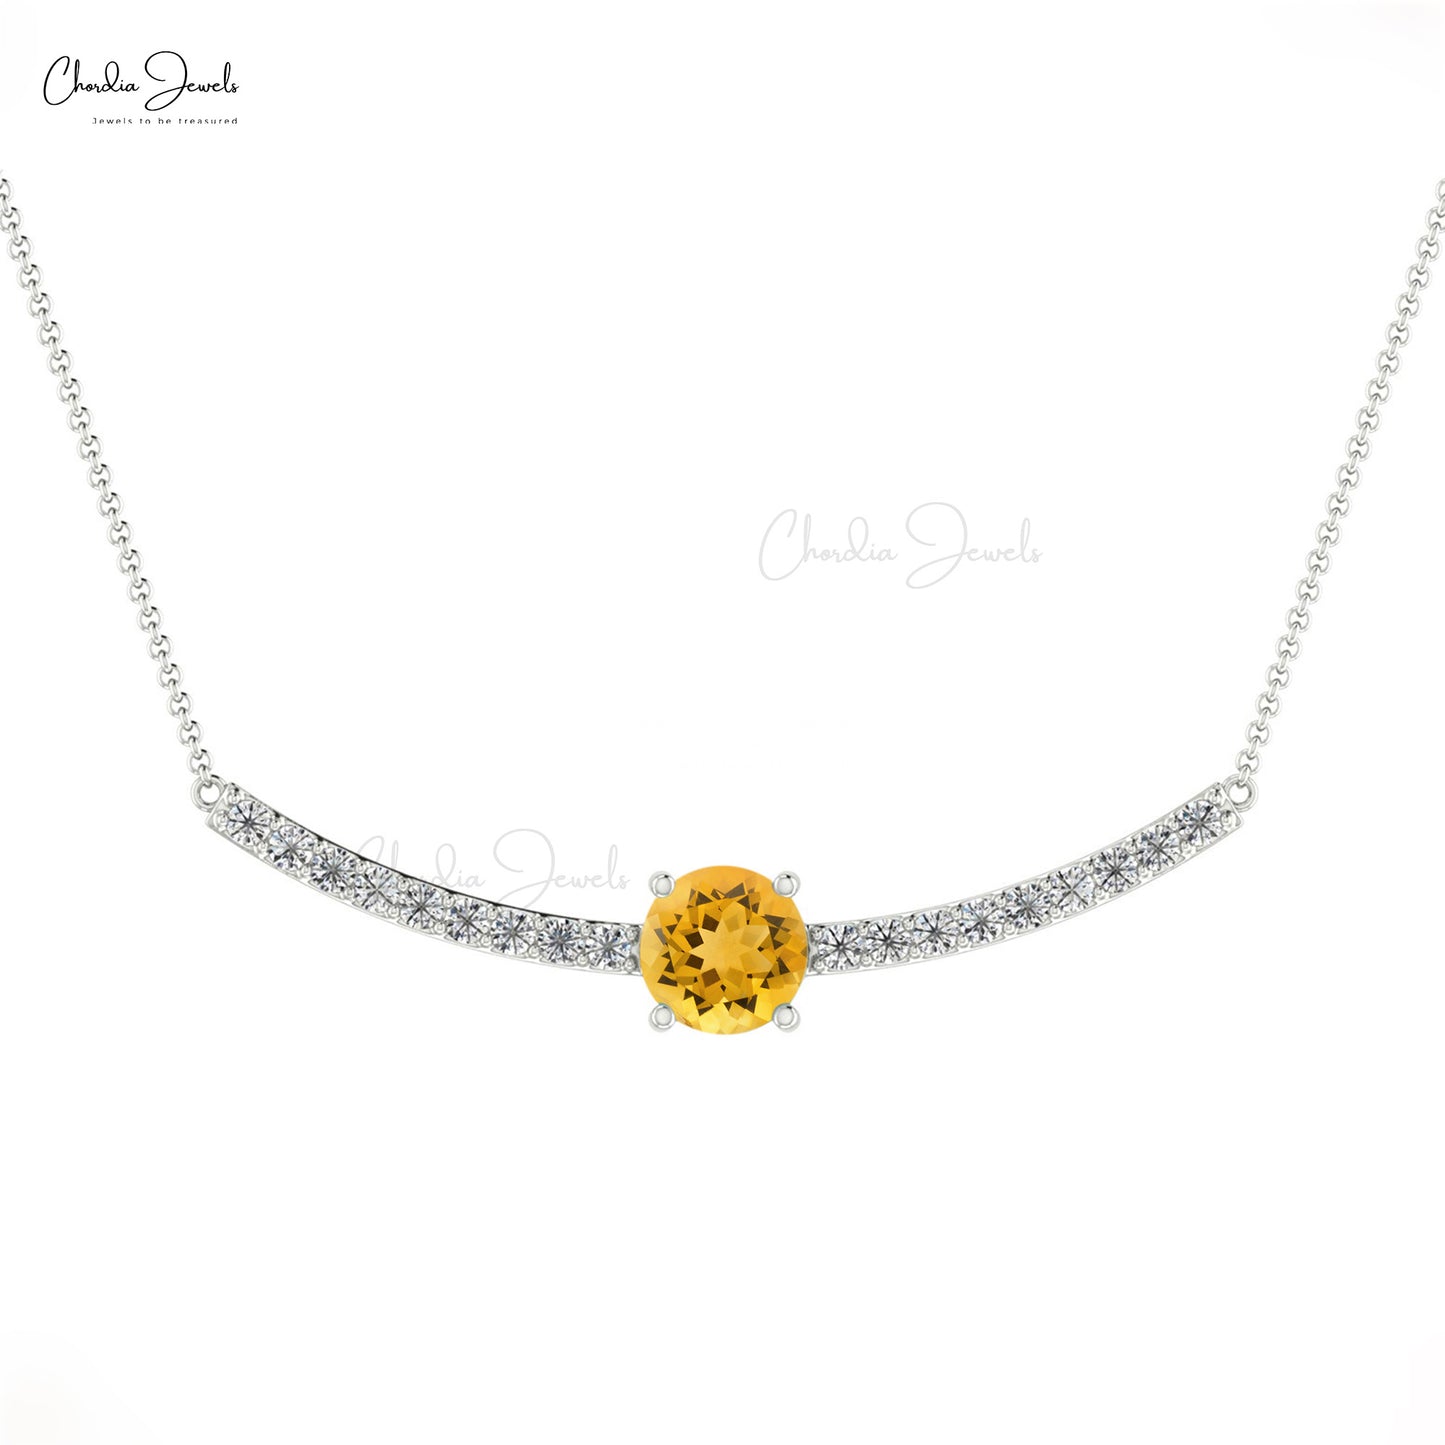 Natural Citrine Statement Necklace, 5mm Round Faceted Gemstone Necklace, 14k Solid Gold November Birthstone Necklace Gift for Her